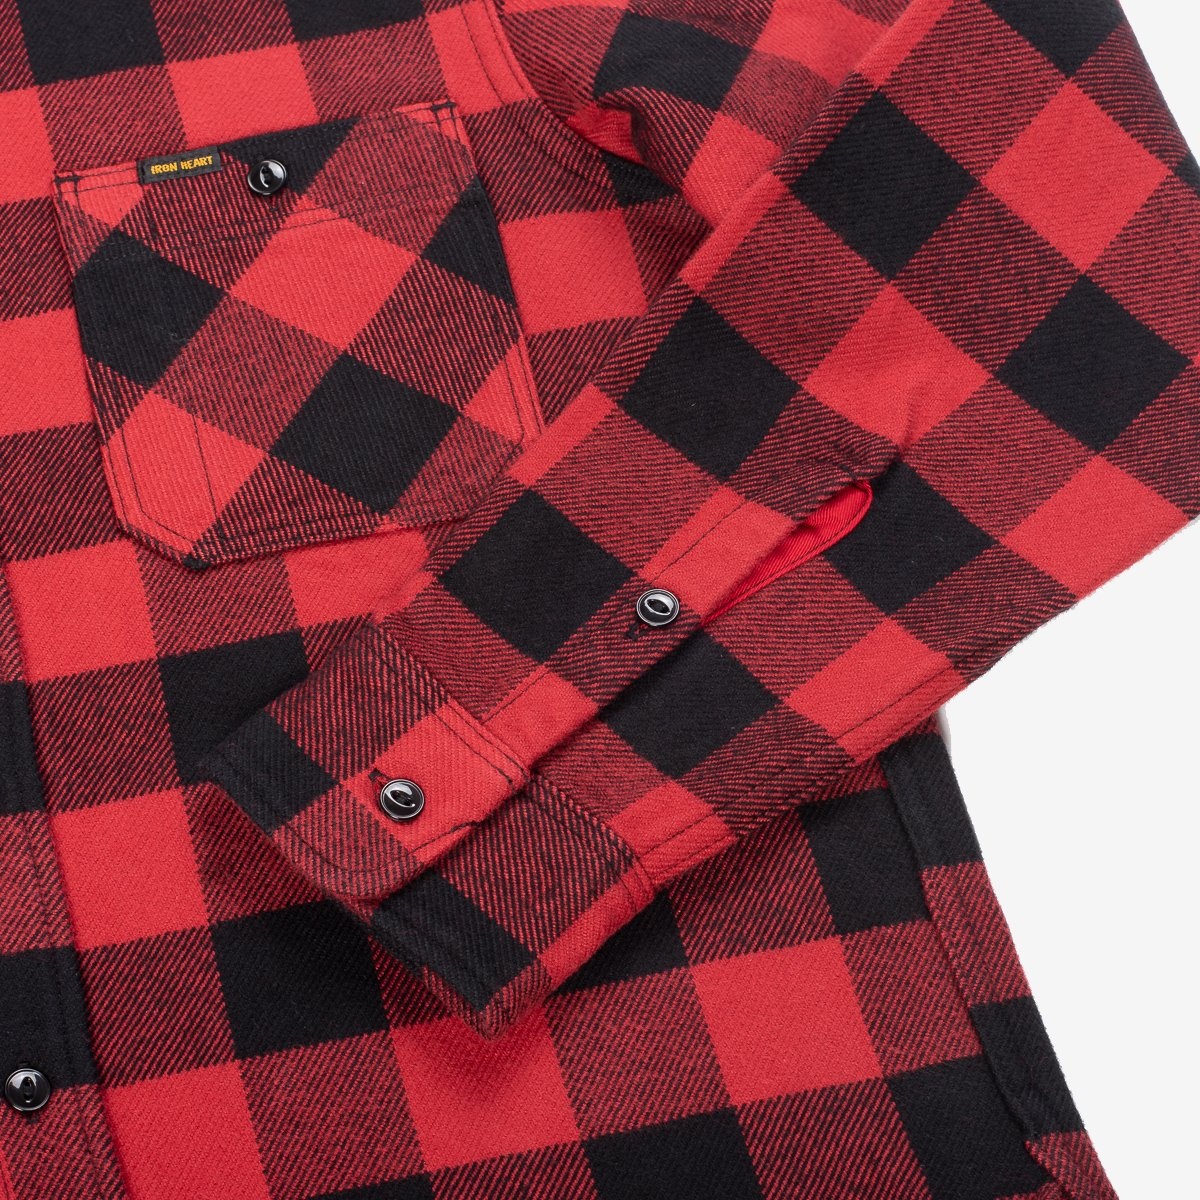 IHSH-244-RED Ultra Heavy Flannel Buffalo Check Work Shirt - Red/Black - 7